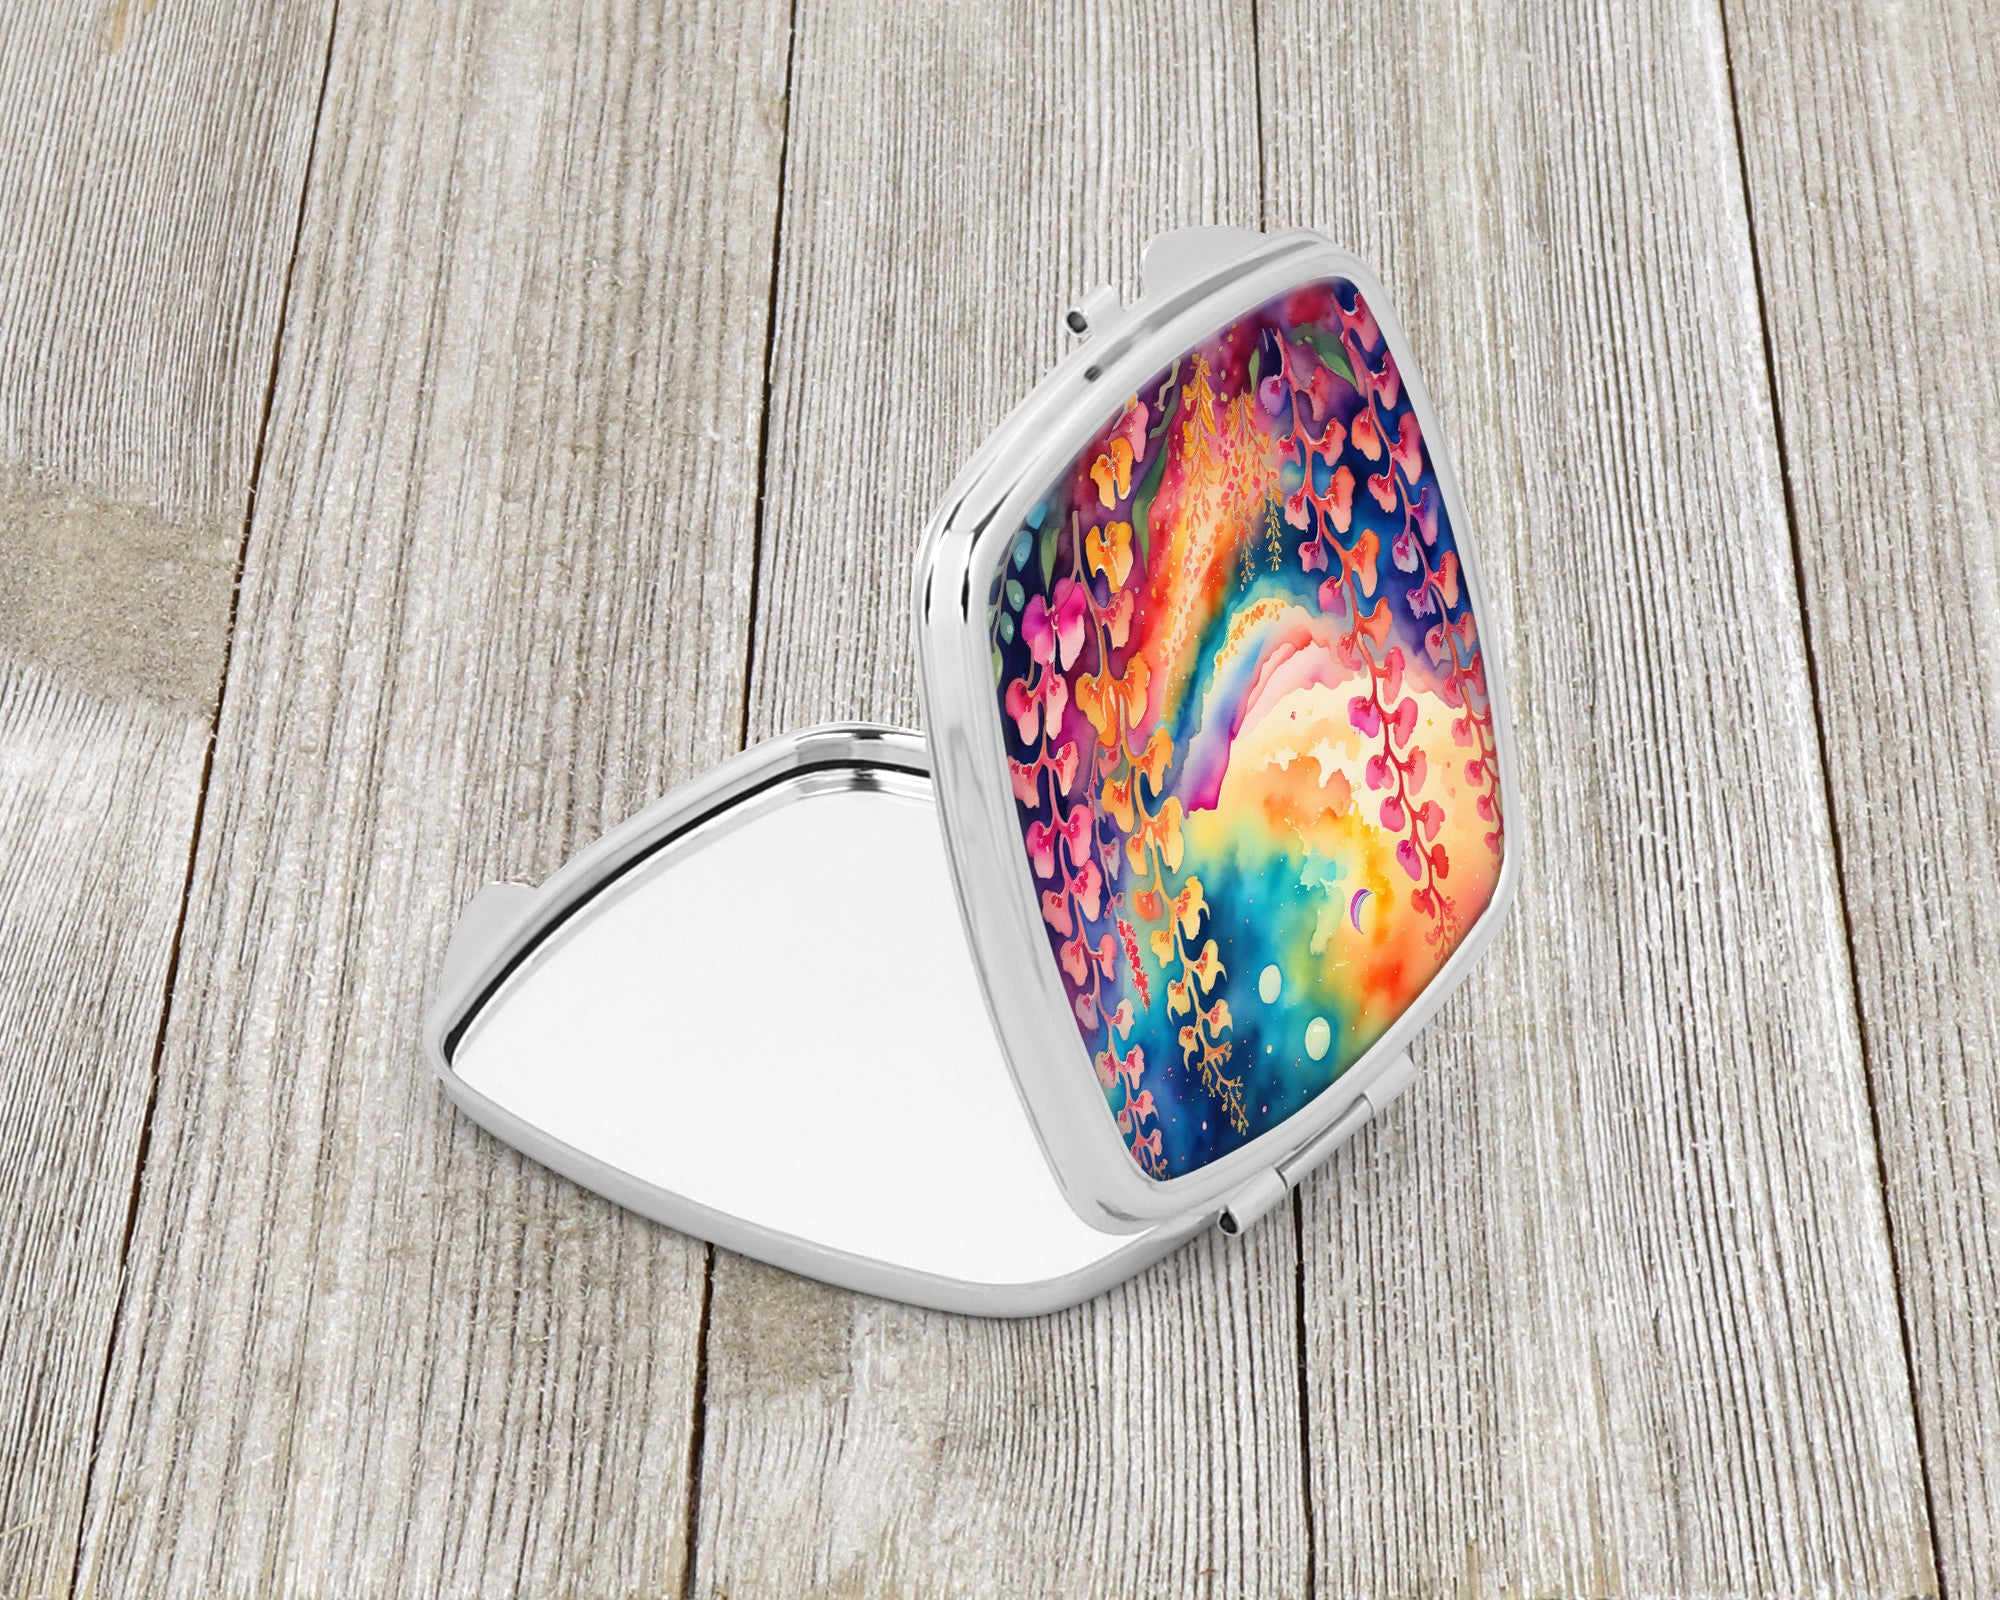 Colorful Snapdragon Compact Mirror